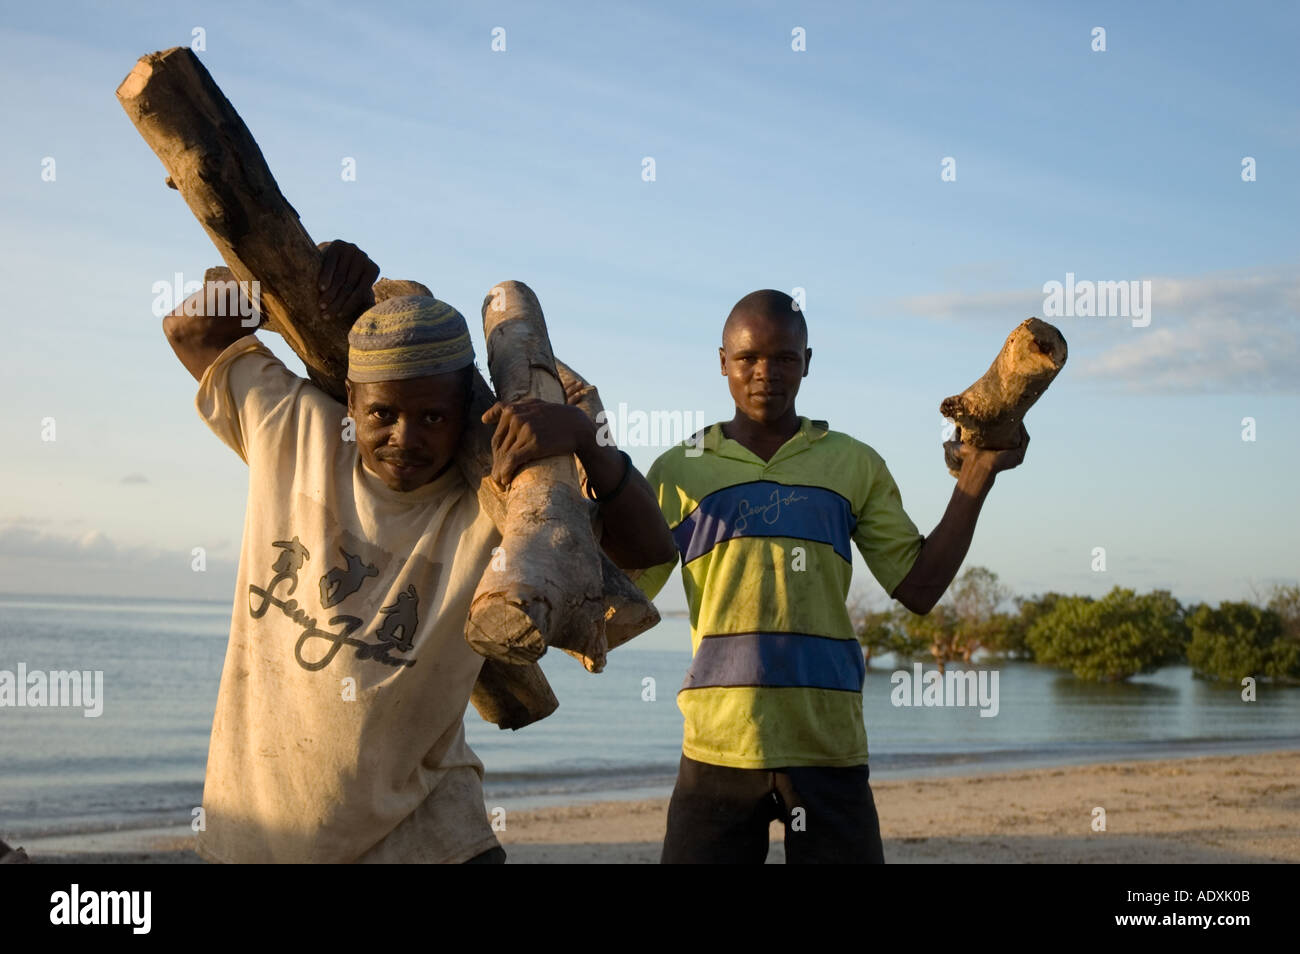 Two young men unloading a dhow on the Indian Ocean Africa Mozambique that was carrying a load of firewood Stock Photo